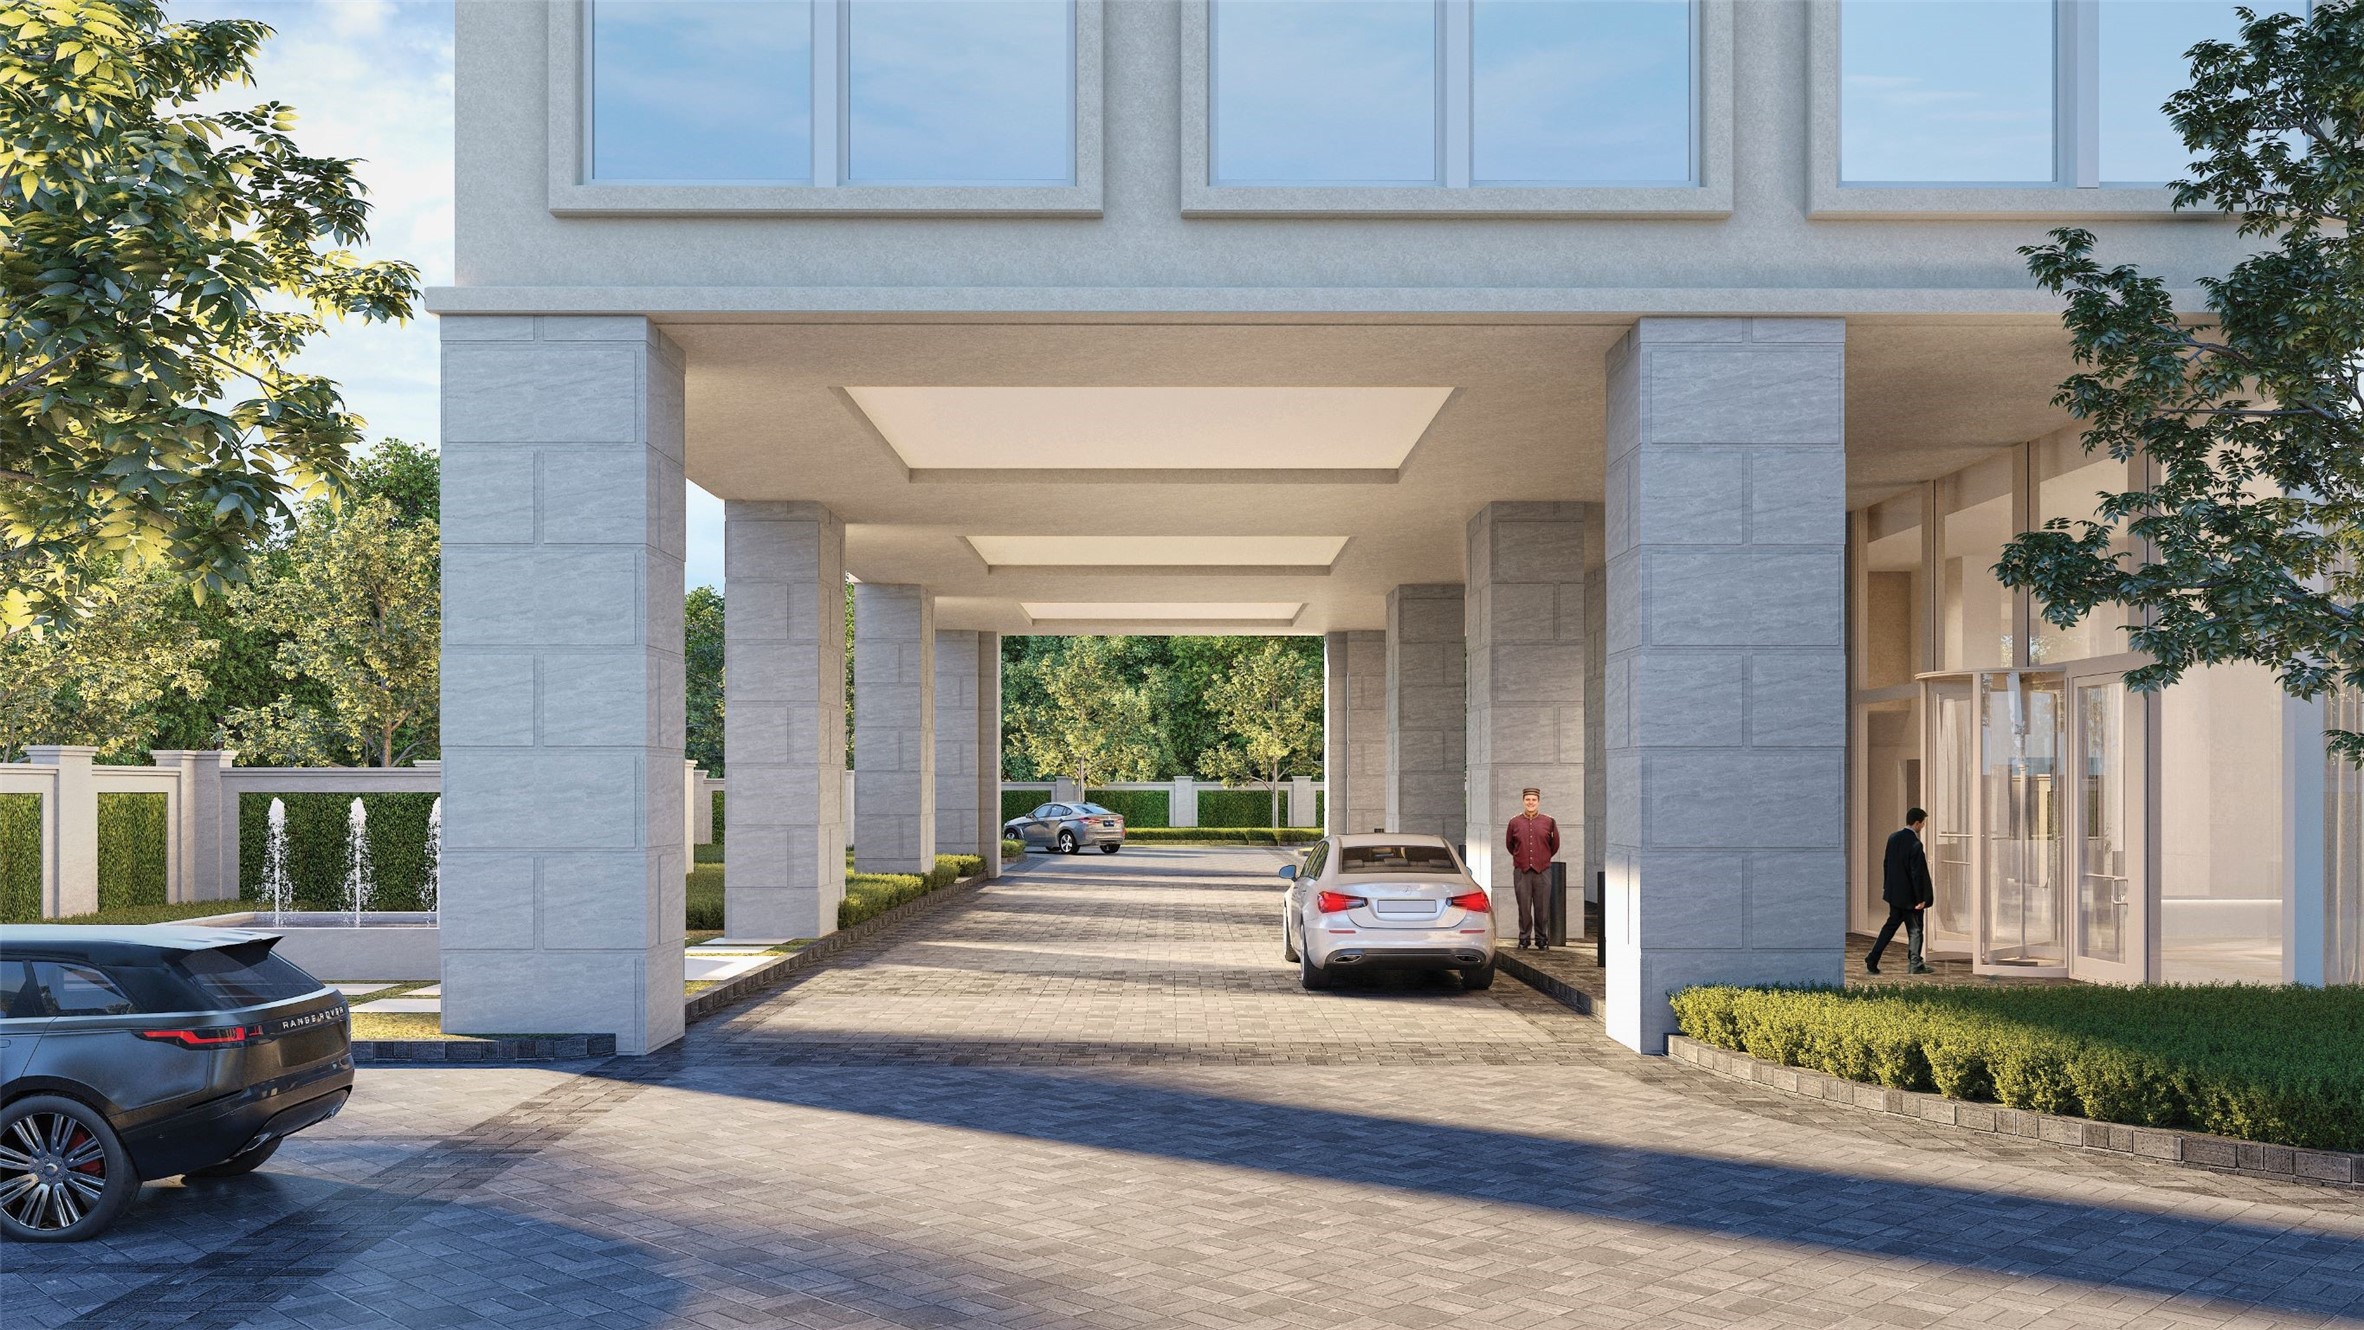 Just past the 8 ft. ivy-clad privacy wall that completely engulfs the building's perimeter, residents and guests alike find the grand, dual entry/exit porte-cochere where the valet awaits to take it from here.